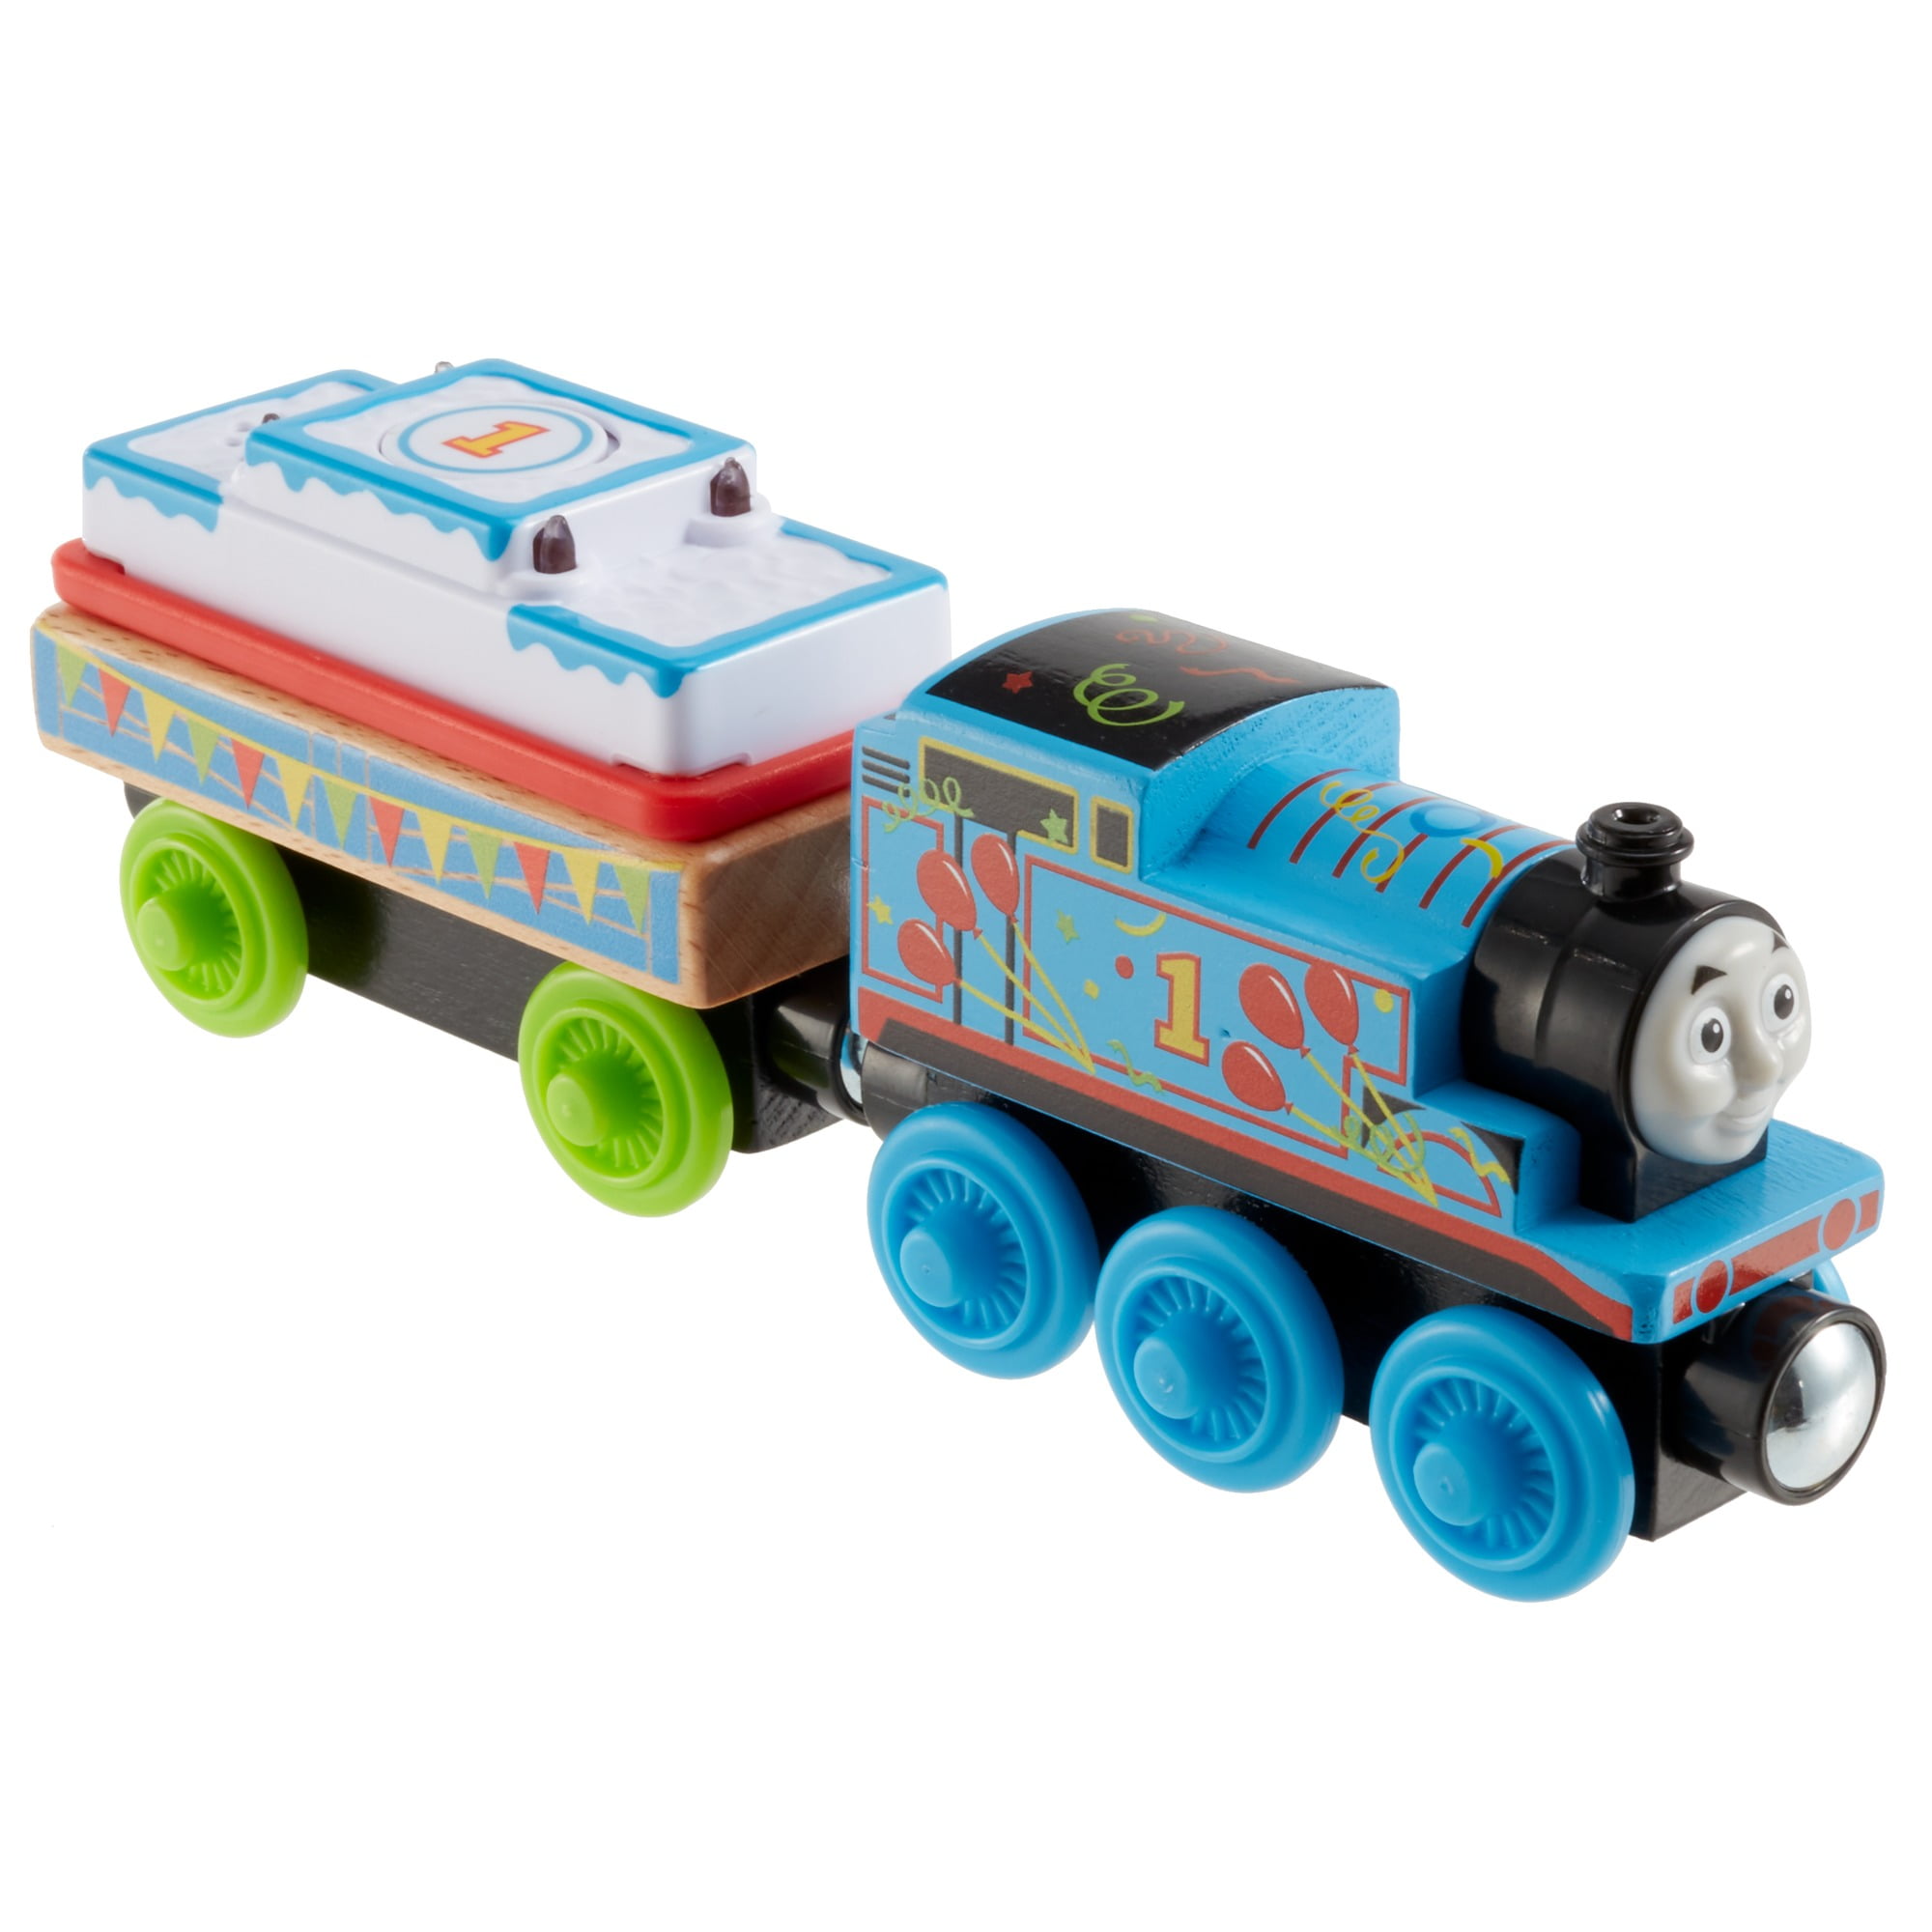 THOMAS TANK ENGINE CHARACTERS CANVAS PICTURE 31 DESIGNS TO CHOOSE FROM 